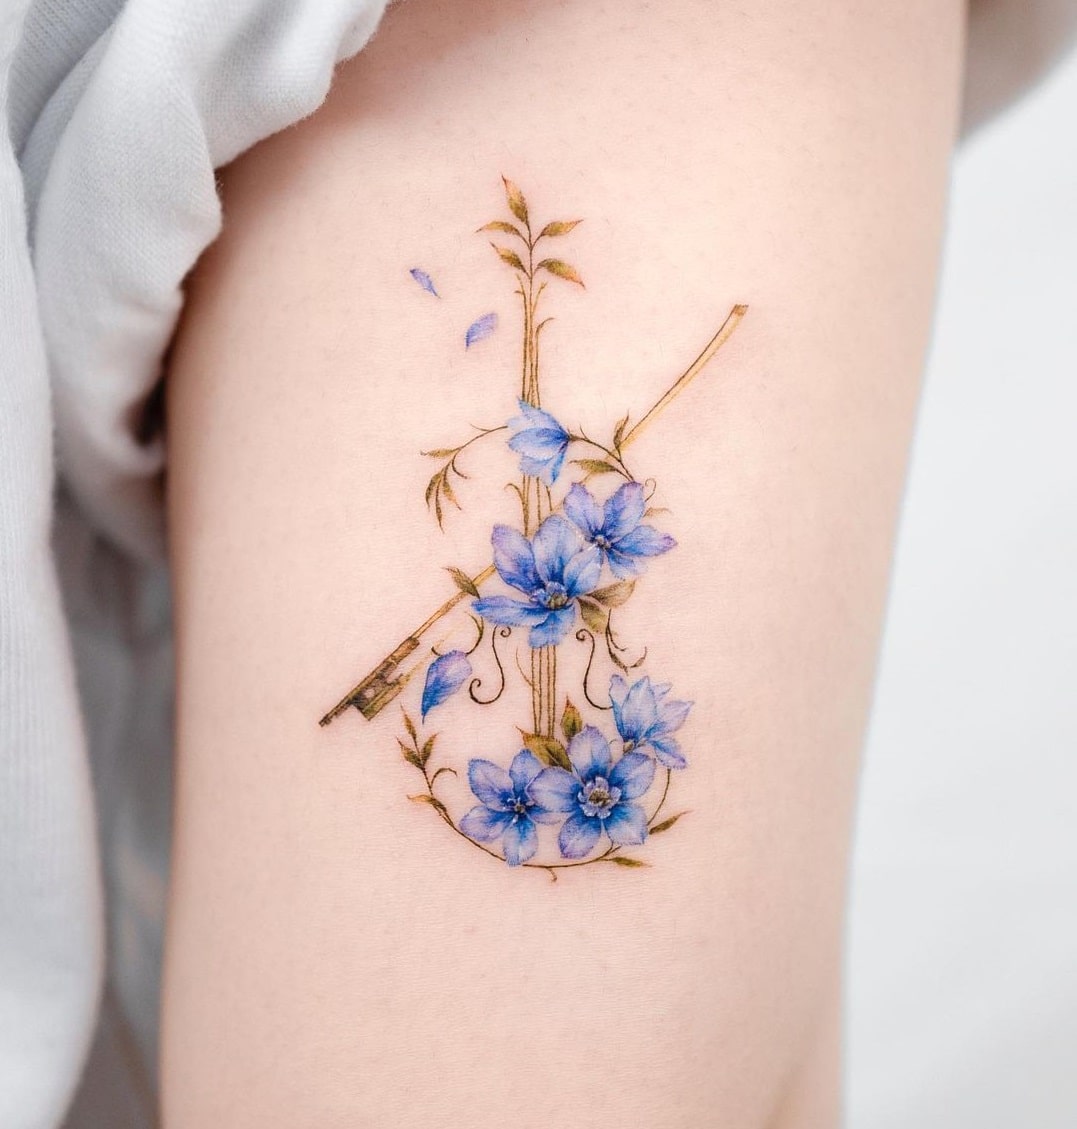 The Meaning Of Larkspur Tattoos: A Symbolism Guide